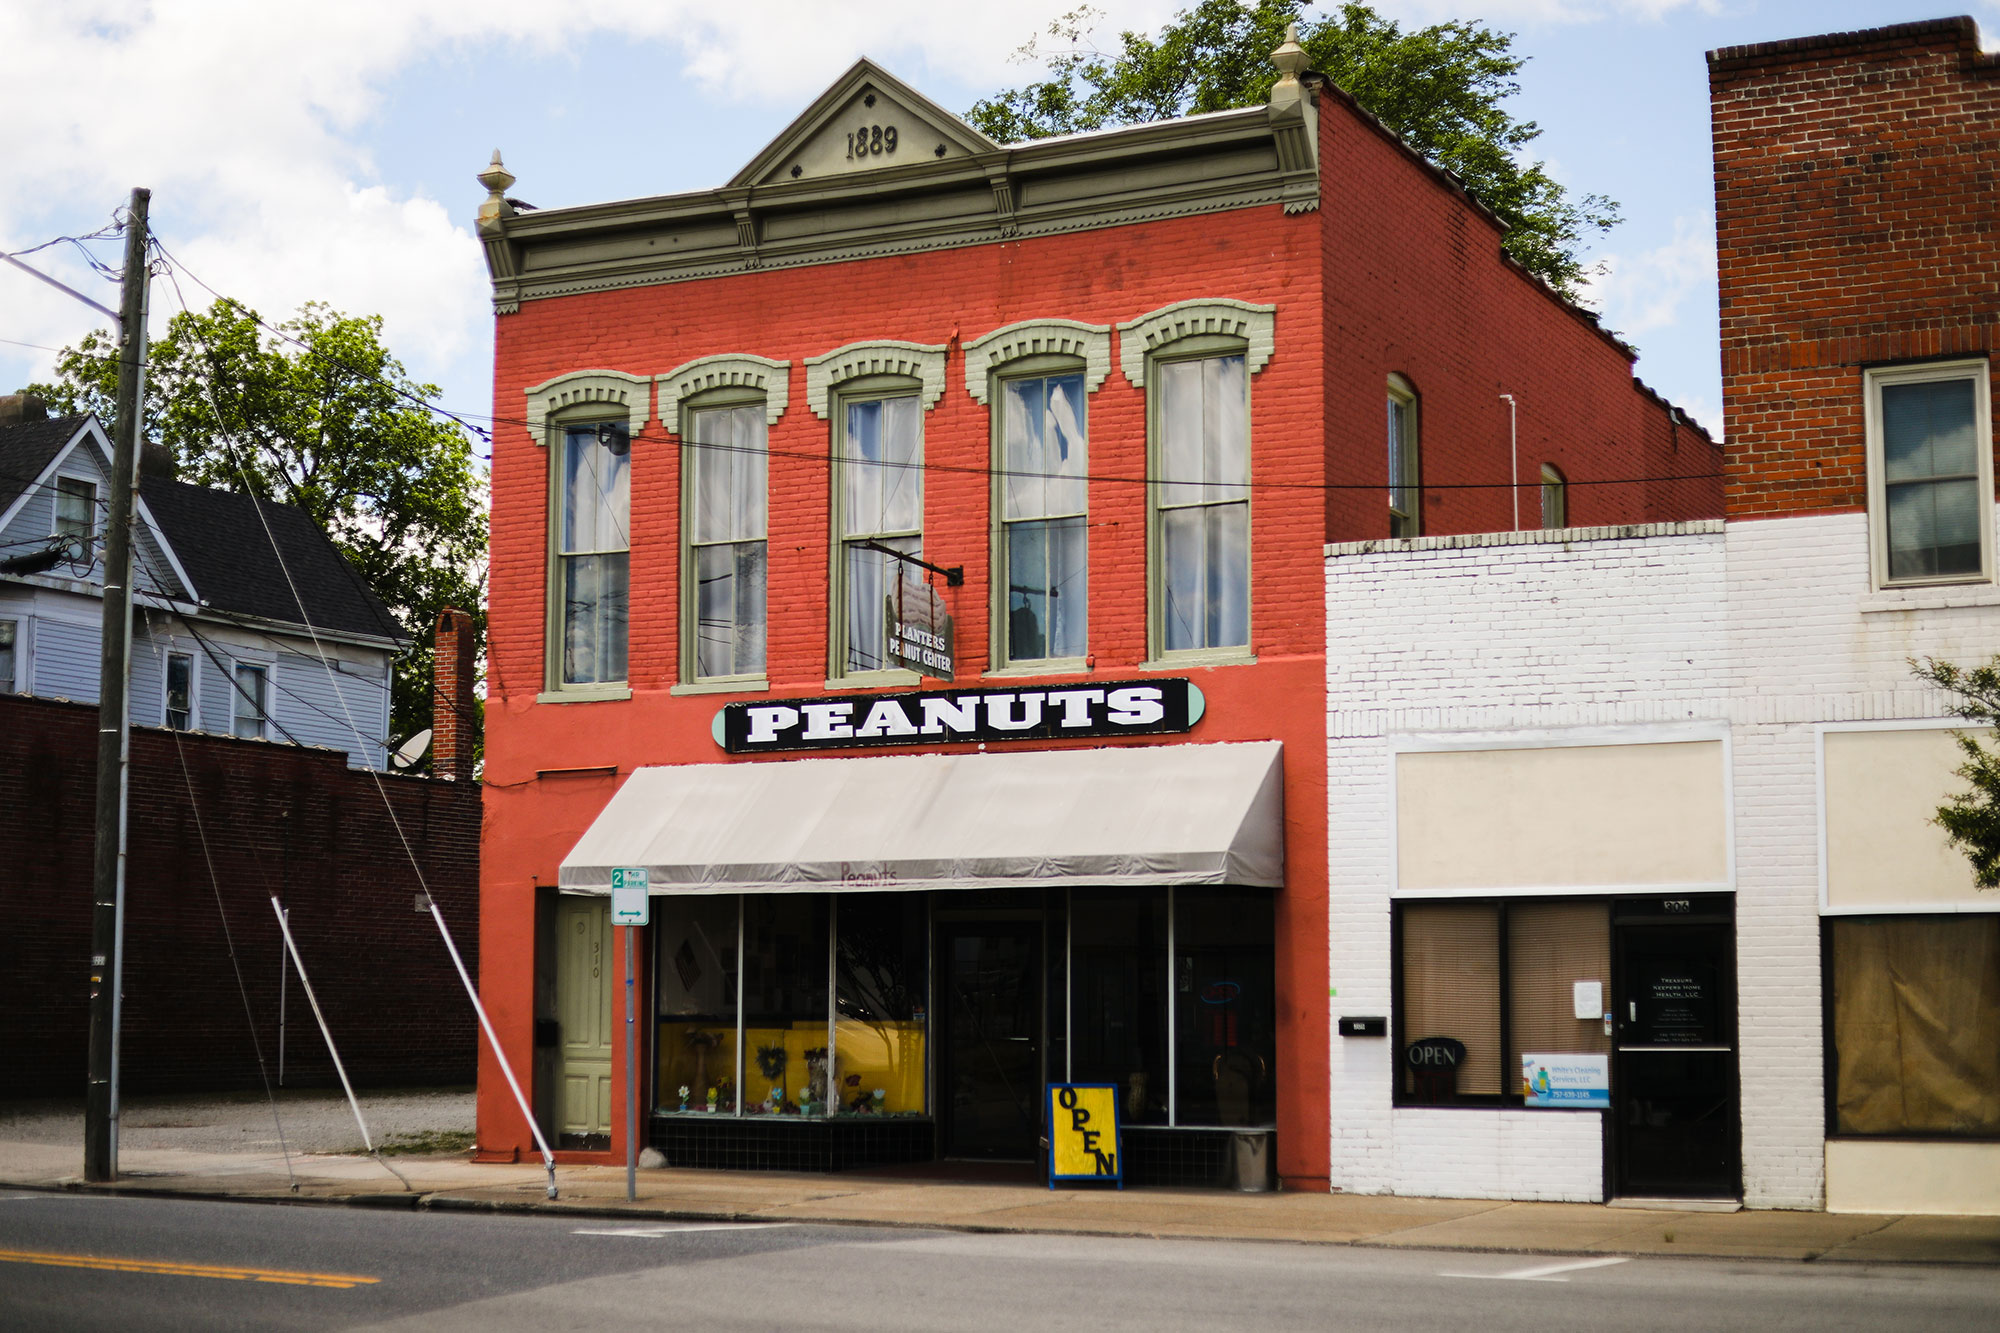 The Planters Peanuts Center building in the Suffolk, Virginia